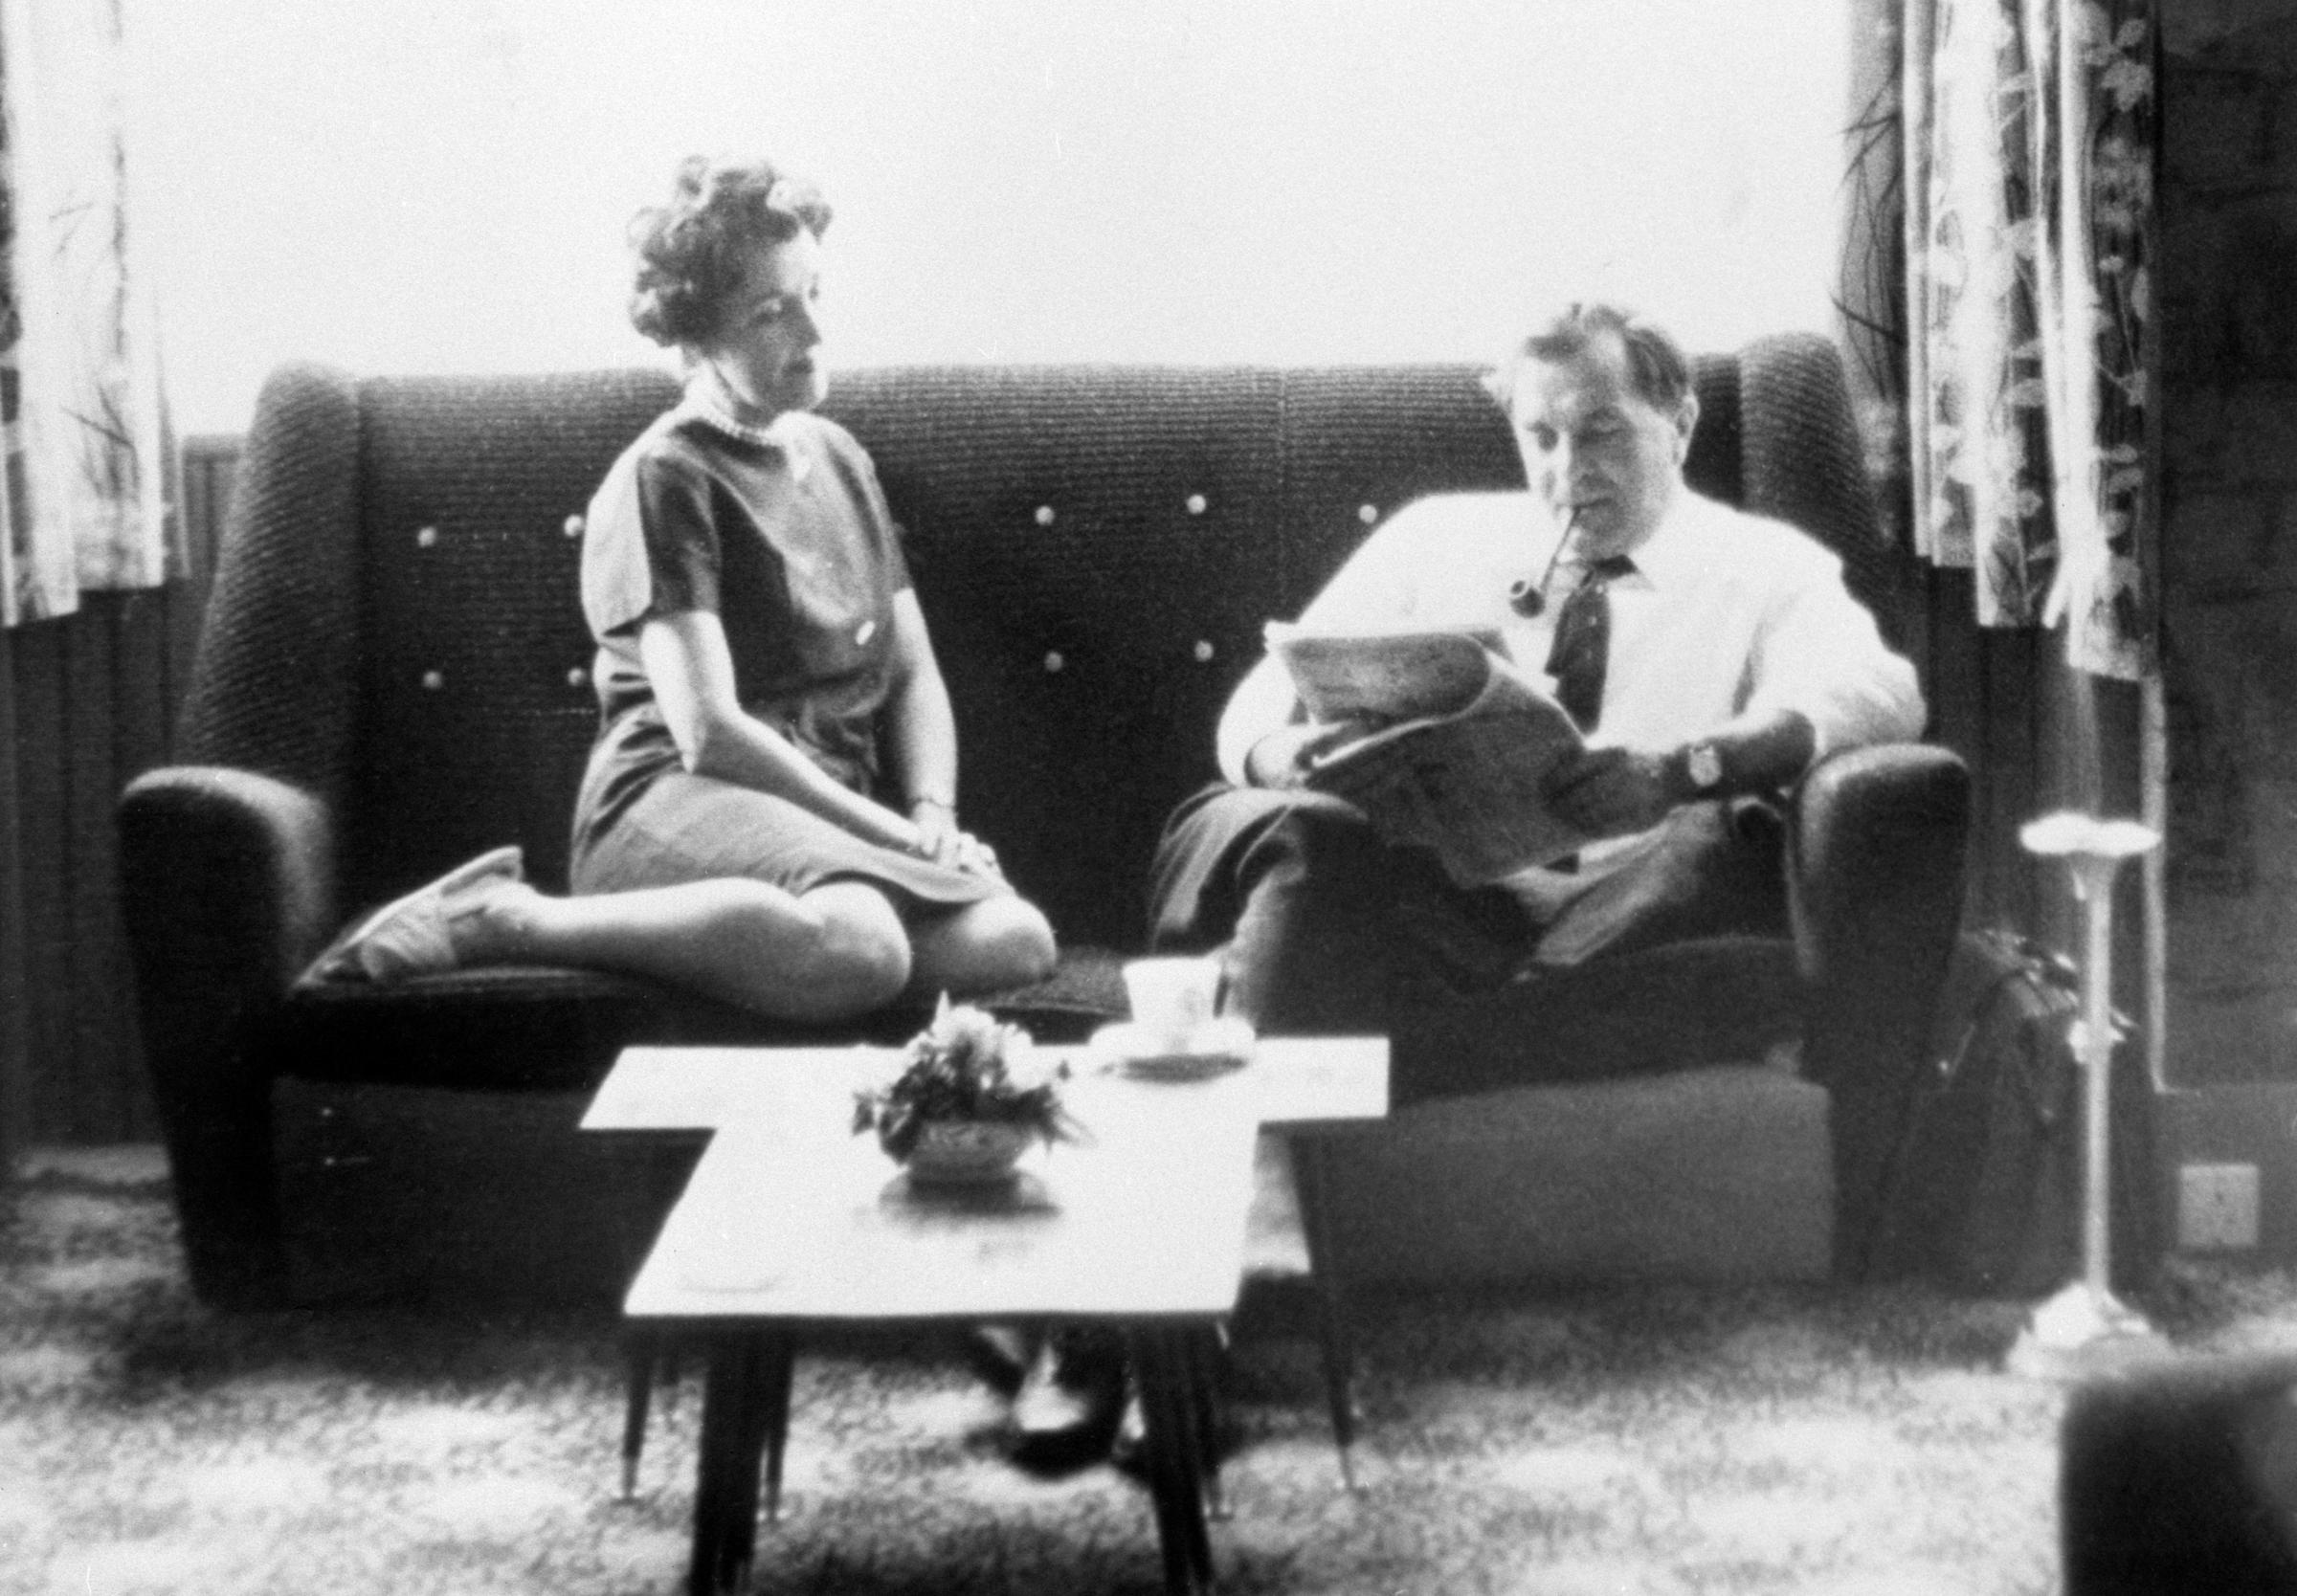 More relaxing times - Frederick West and his wife Josephine in their Leigh bungalow before he headed into hospital